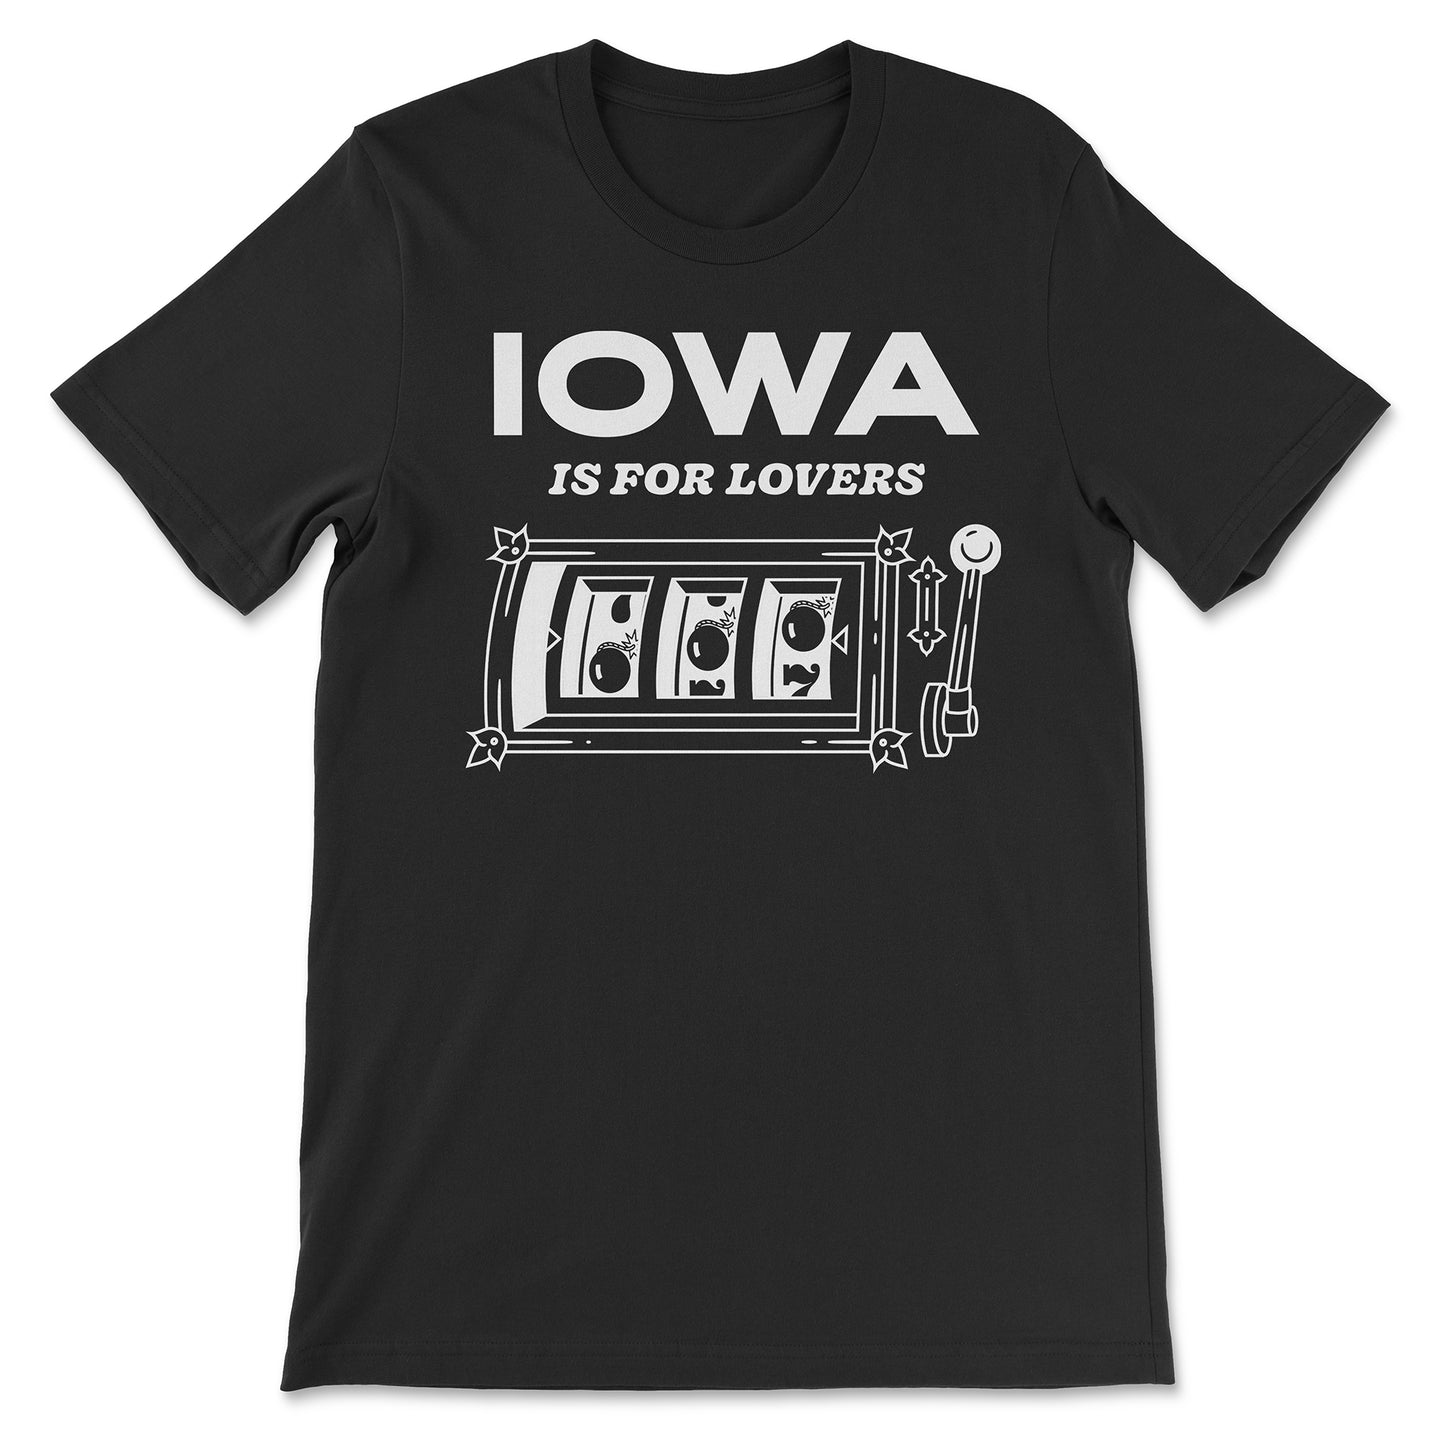 Iowa Is For Lovers Festival Tee